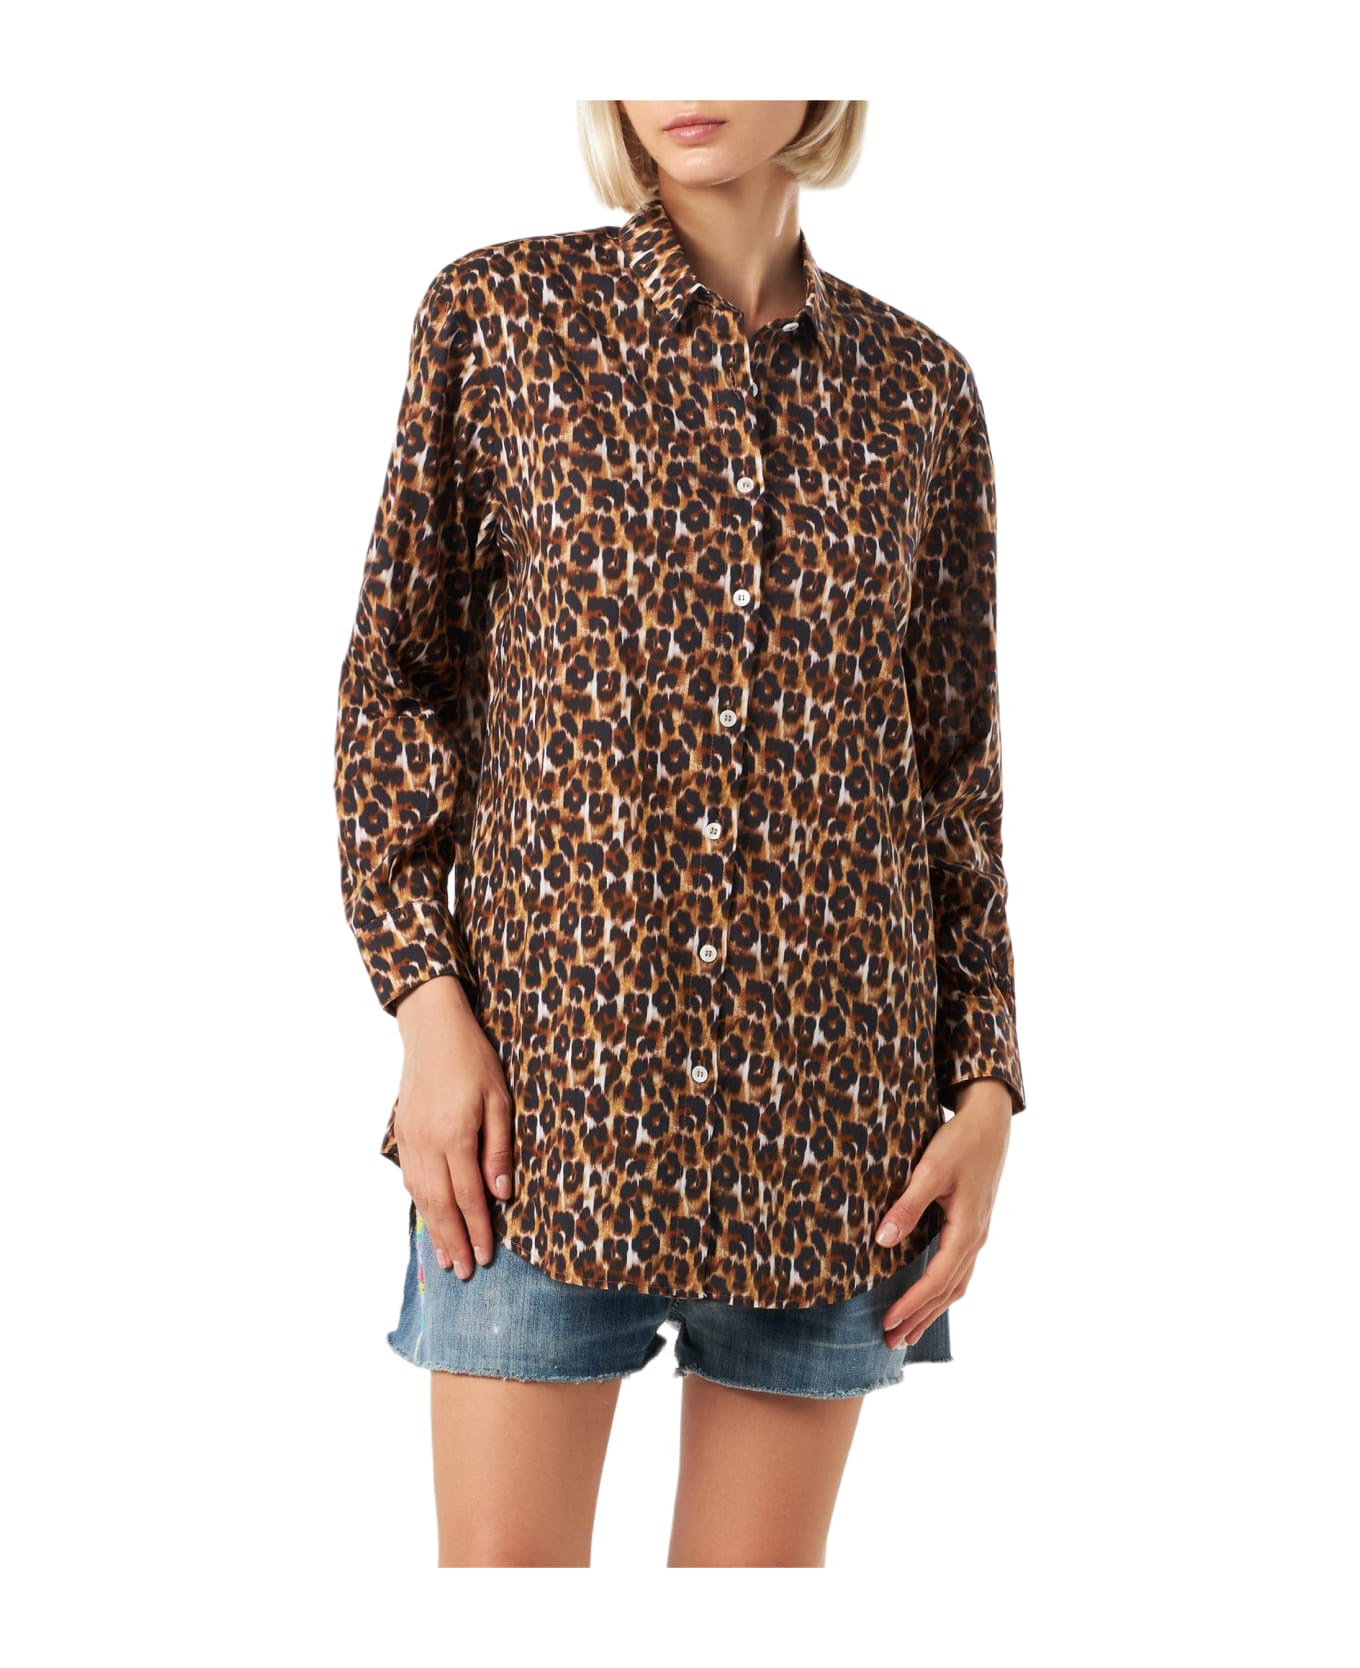 MC2 Saint Barth Leopard Print Cotton Shirt With Embroidery - BROWN